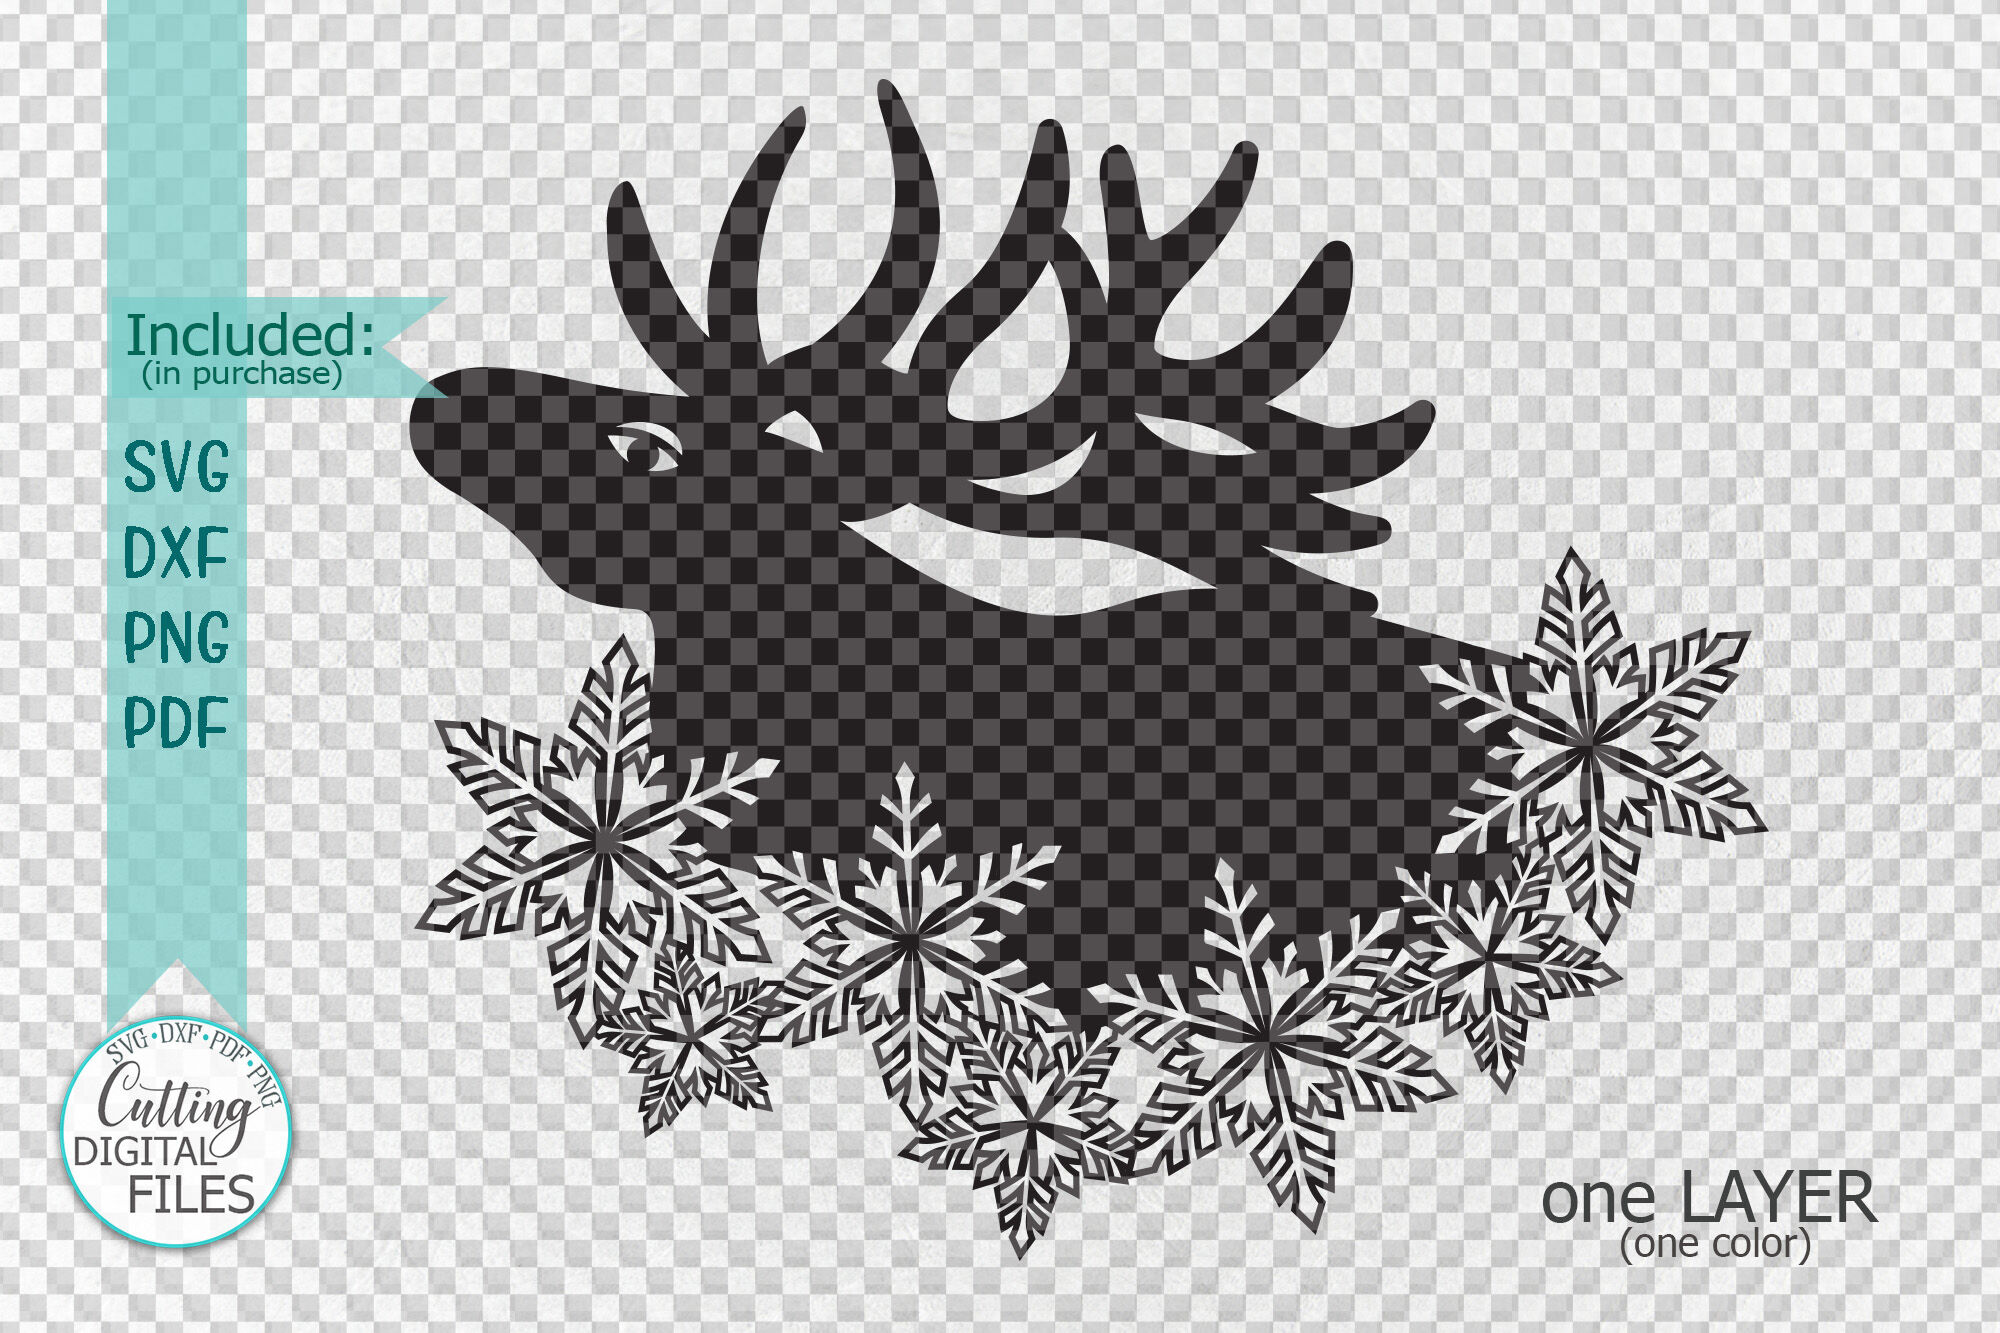 Christmas Moose With Snowflakes Svg Cut Out Template By Kartcreation Thehungryjpeg Com